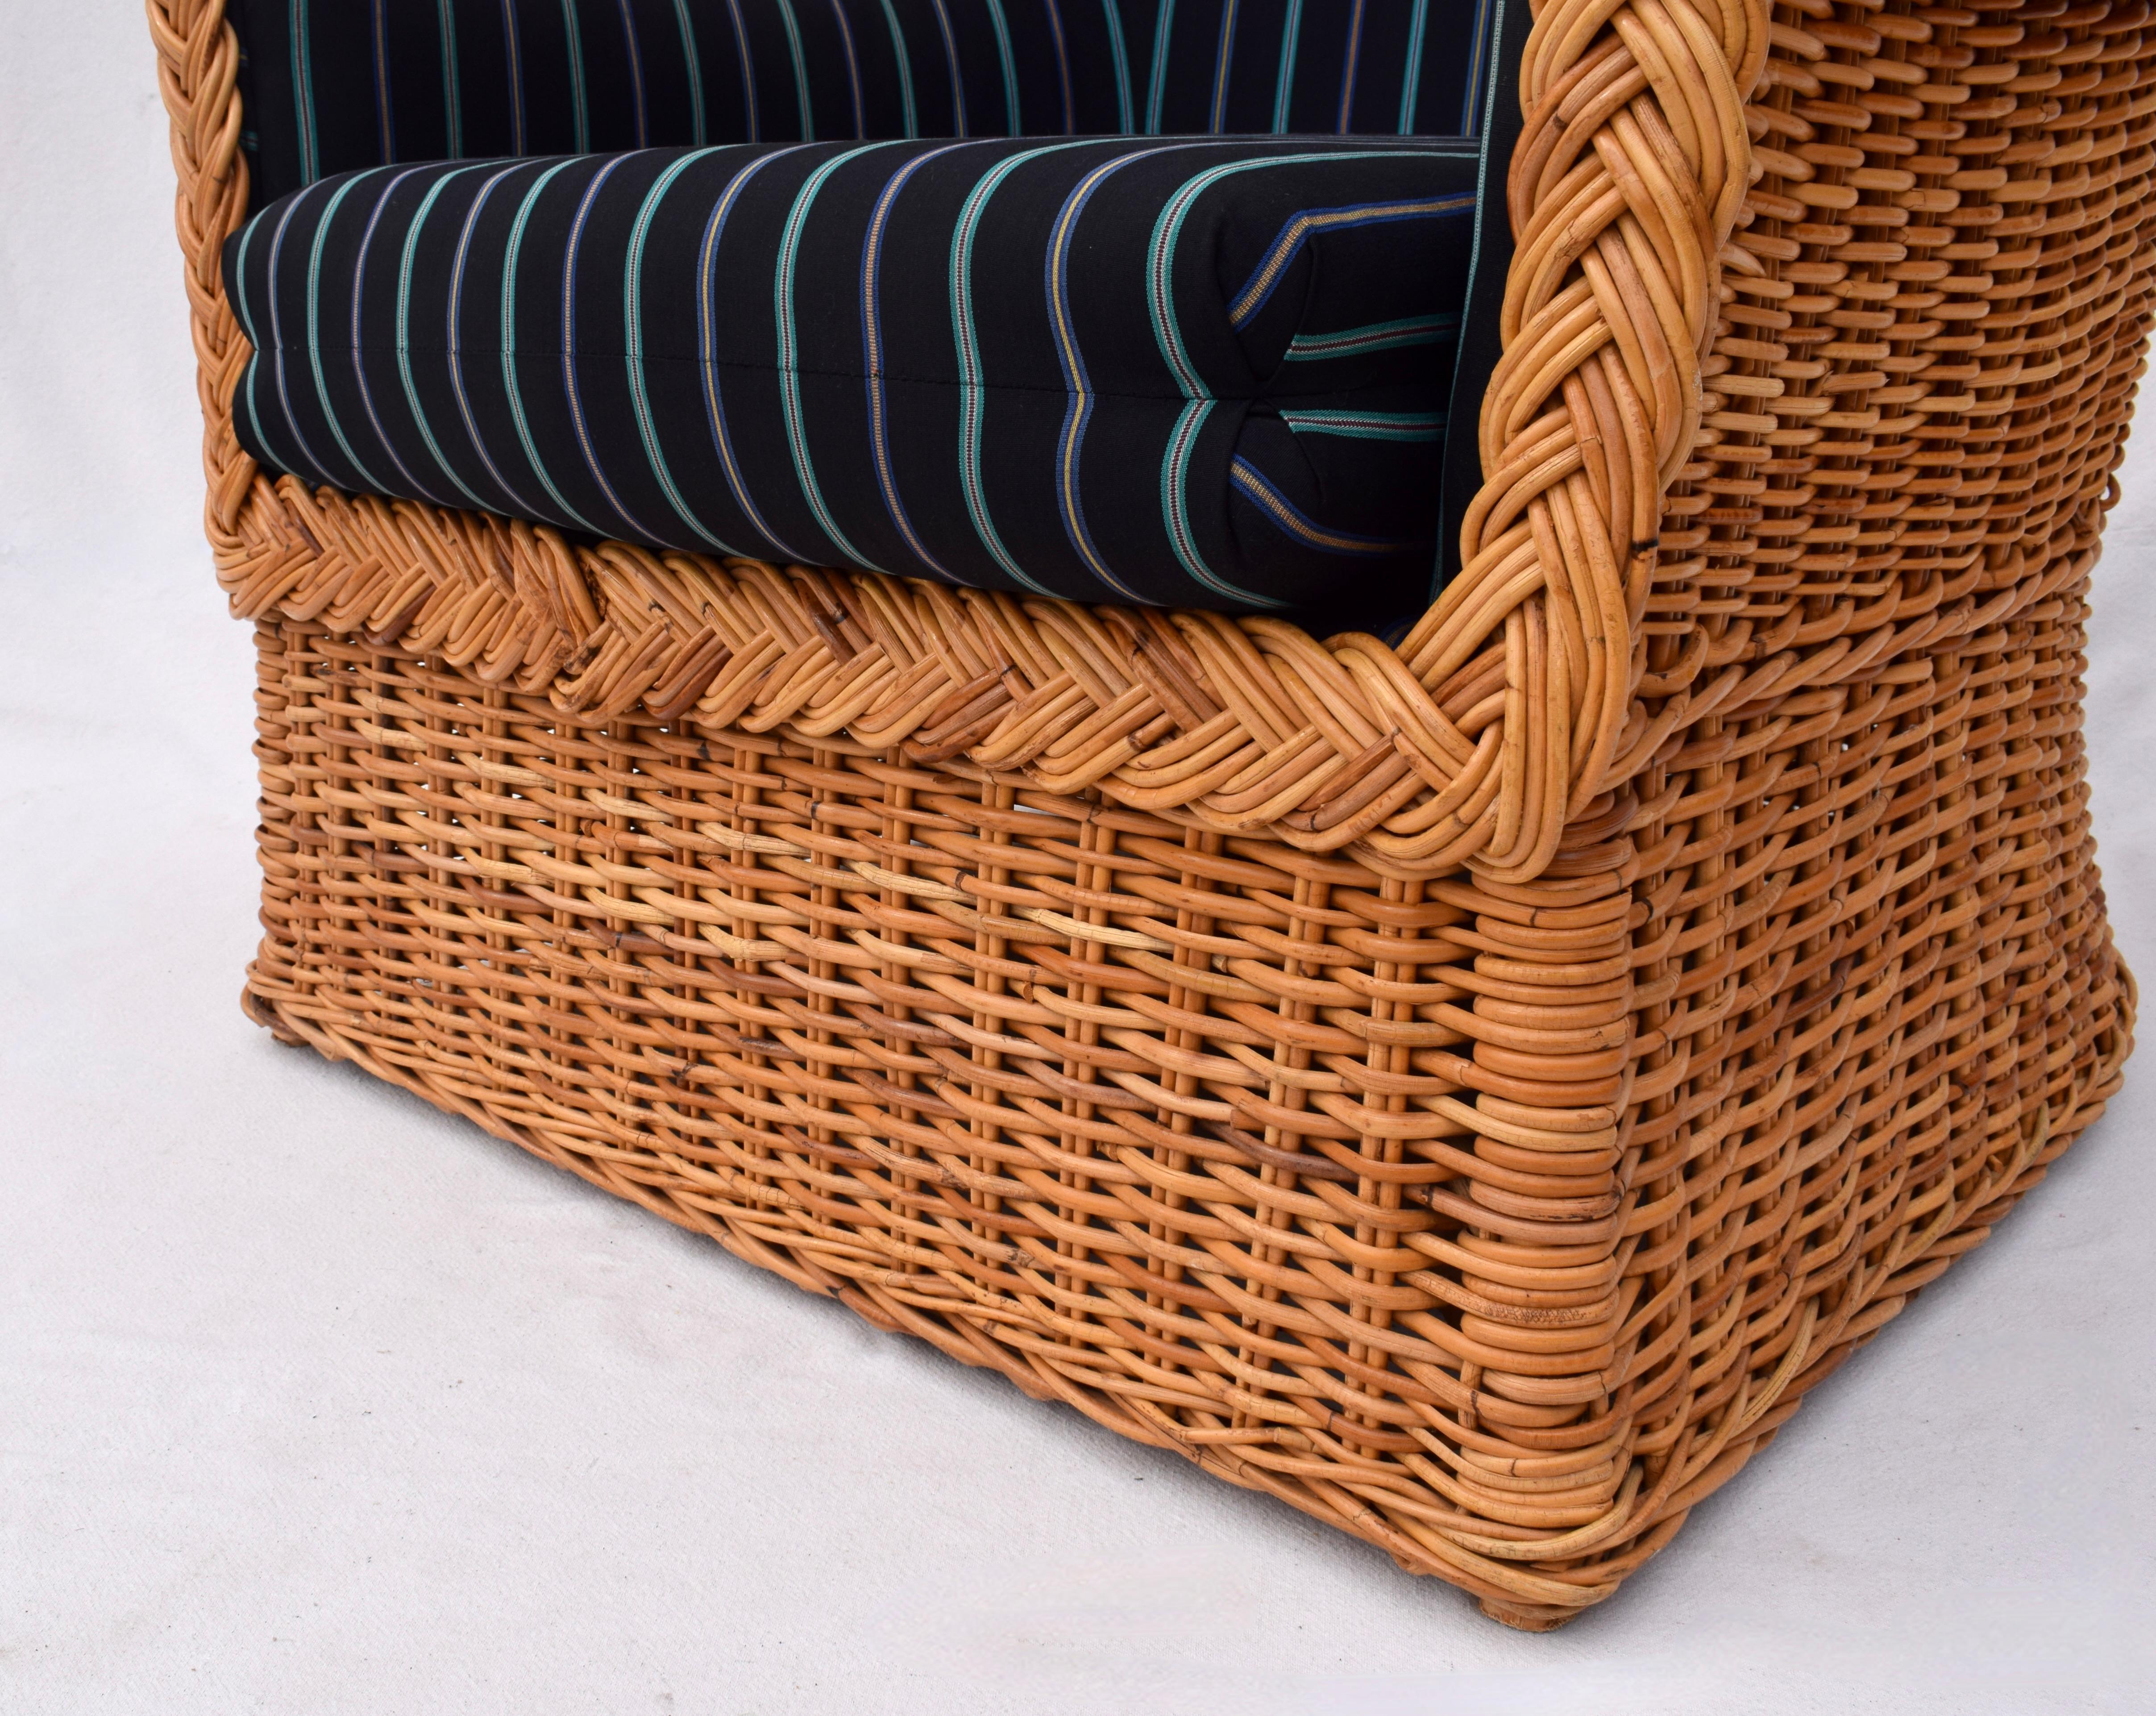 1980's Wicker Works Braided Rattan Club Chairs, Pair For Sale 2